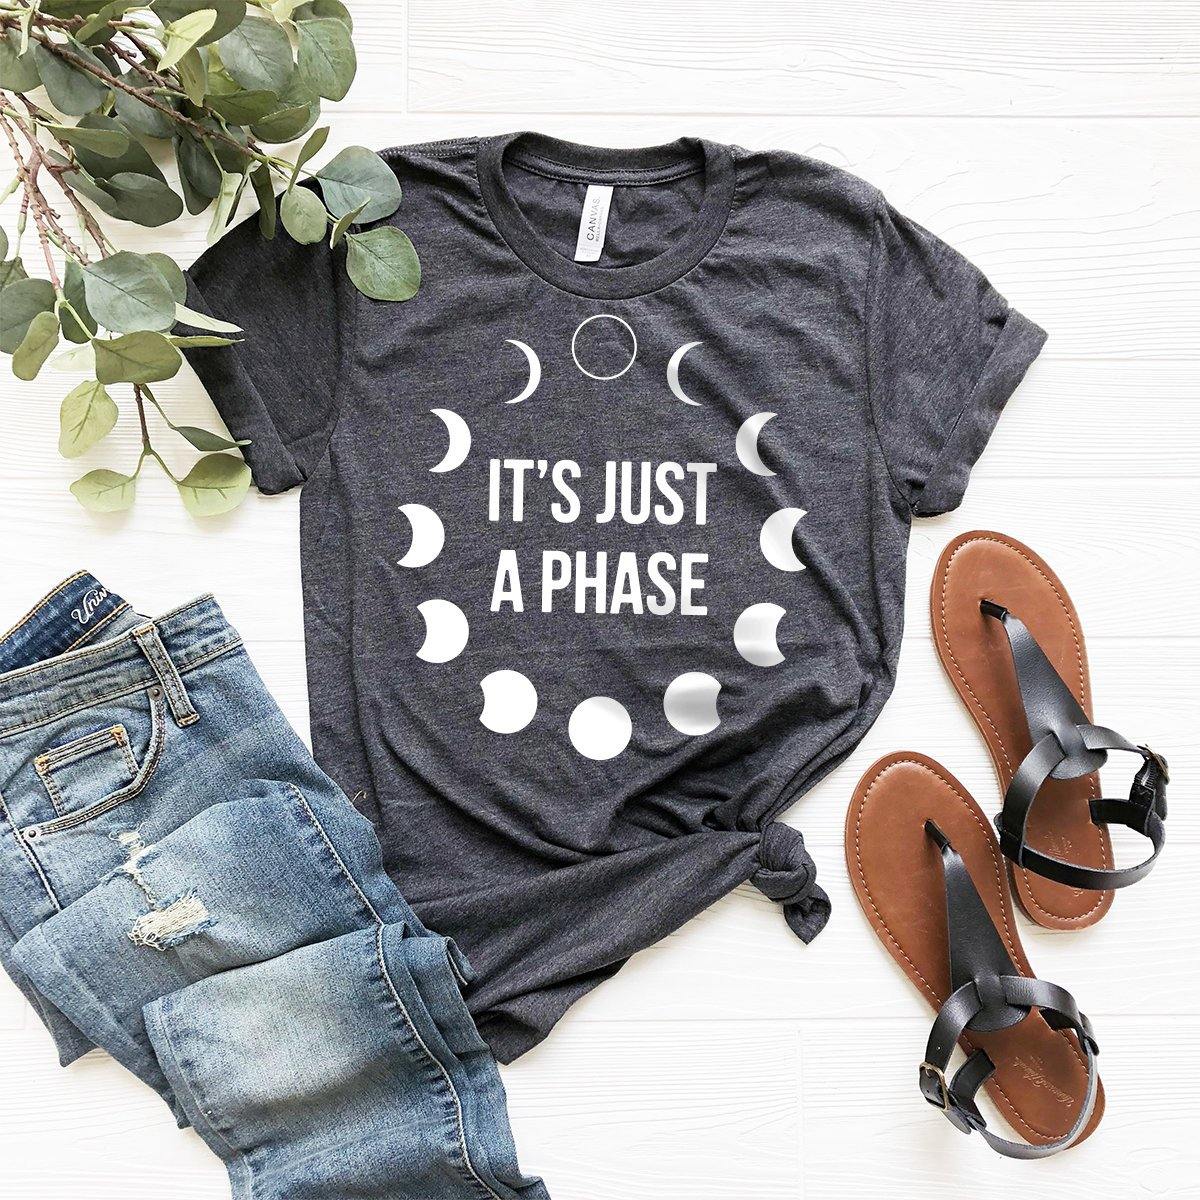 Funny Astrology Shirt, Moon Phases Shirt, It's Just A Phase Shirt, Moon Shirts, Astronomy T-Shirt, Phases Of The Moon Tee, Celestial Shirt - Fastdeliverytees.com